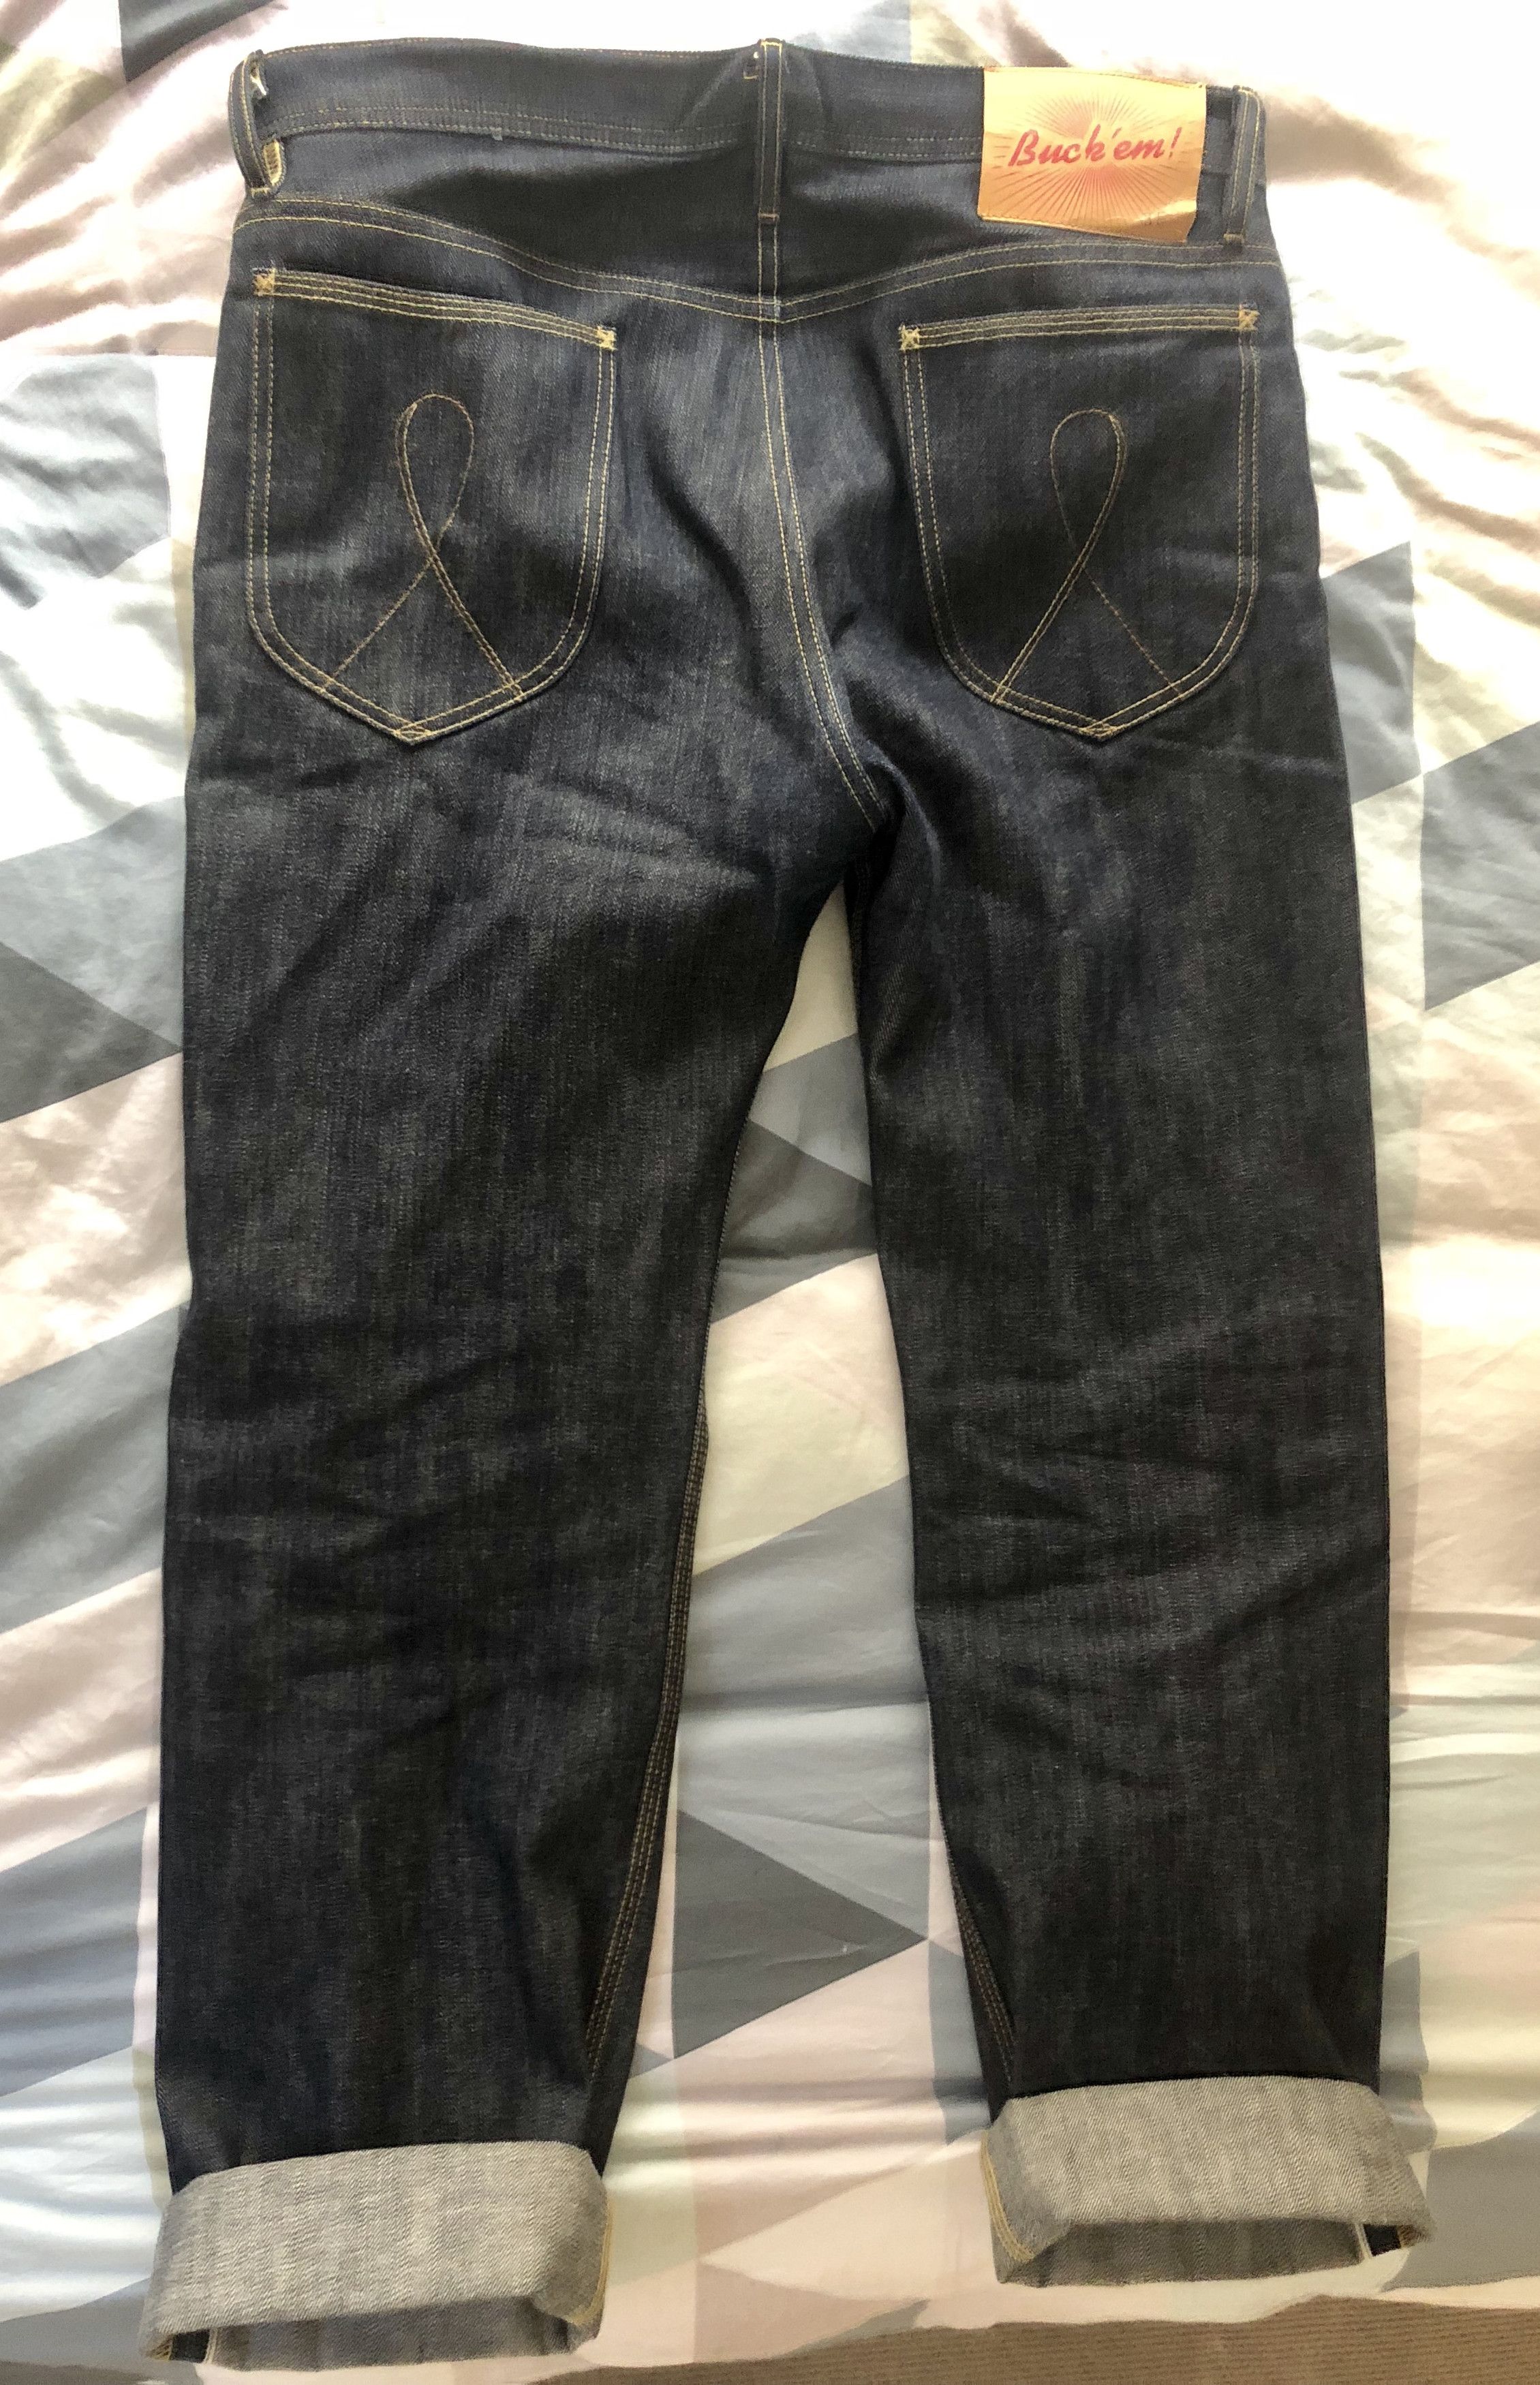 W.H. Ranch R1901 Ryder Jeans Size US 35 - 2 Preview